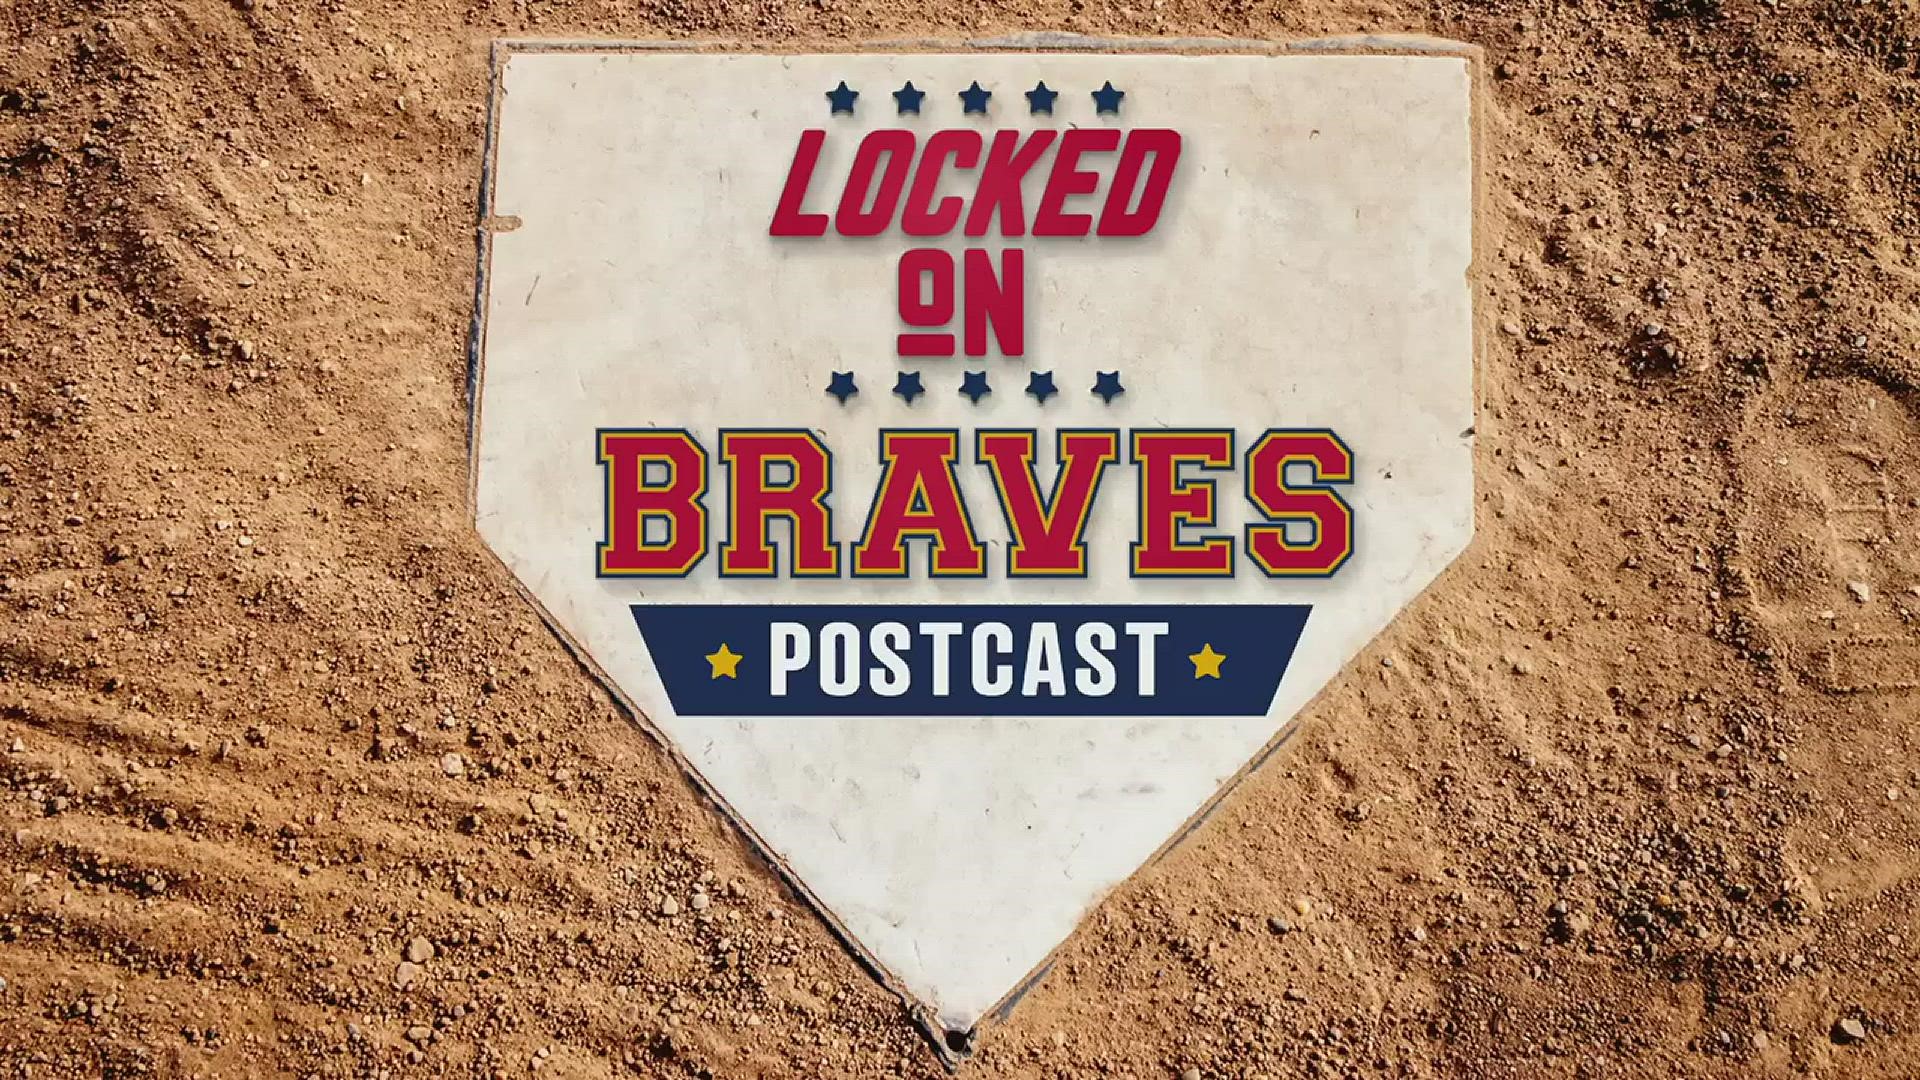 Grant McAuley and Jake Mastroianni of Locked On Braves break down the losses, the offensive woes, pitching struggles, defensive lapses, and more.